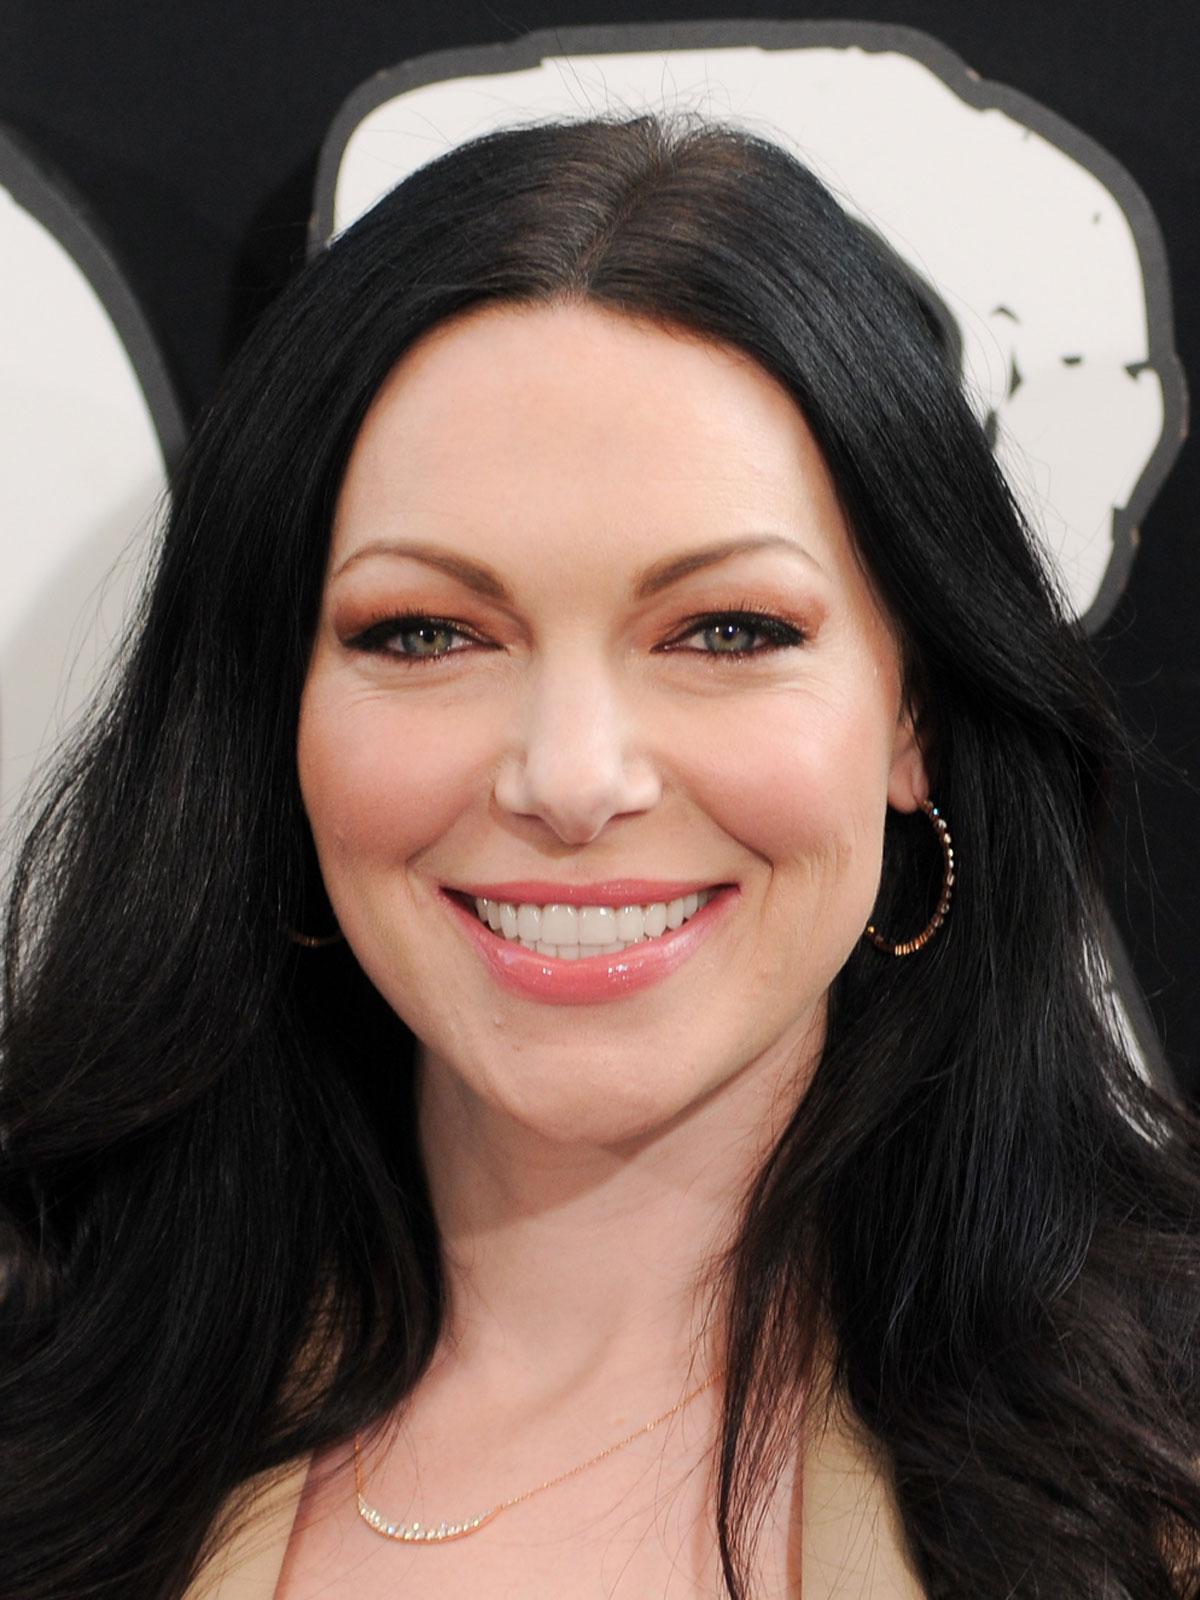 75+ Hot Pictures of Laura Prepon from Orange Is The New Black Will Get You Hot Under Collars | Best Of Comic Books